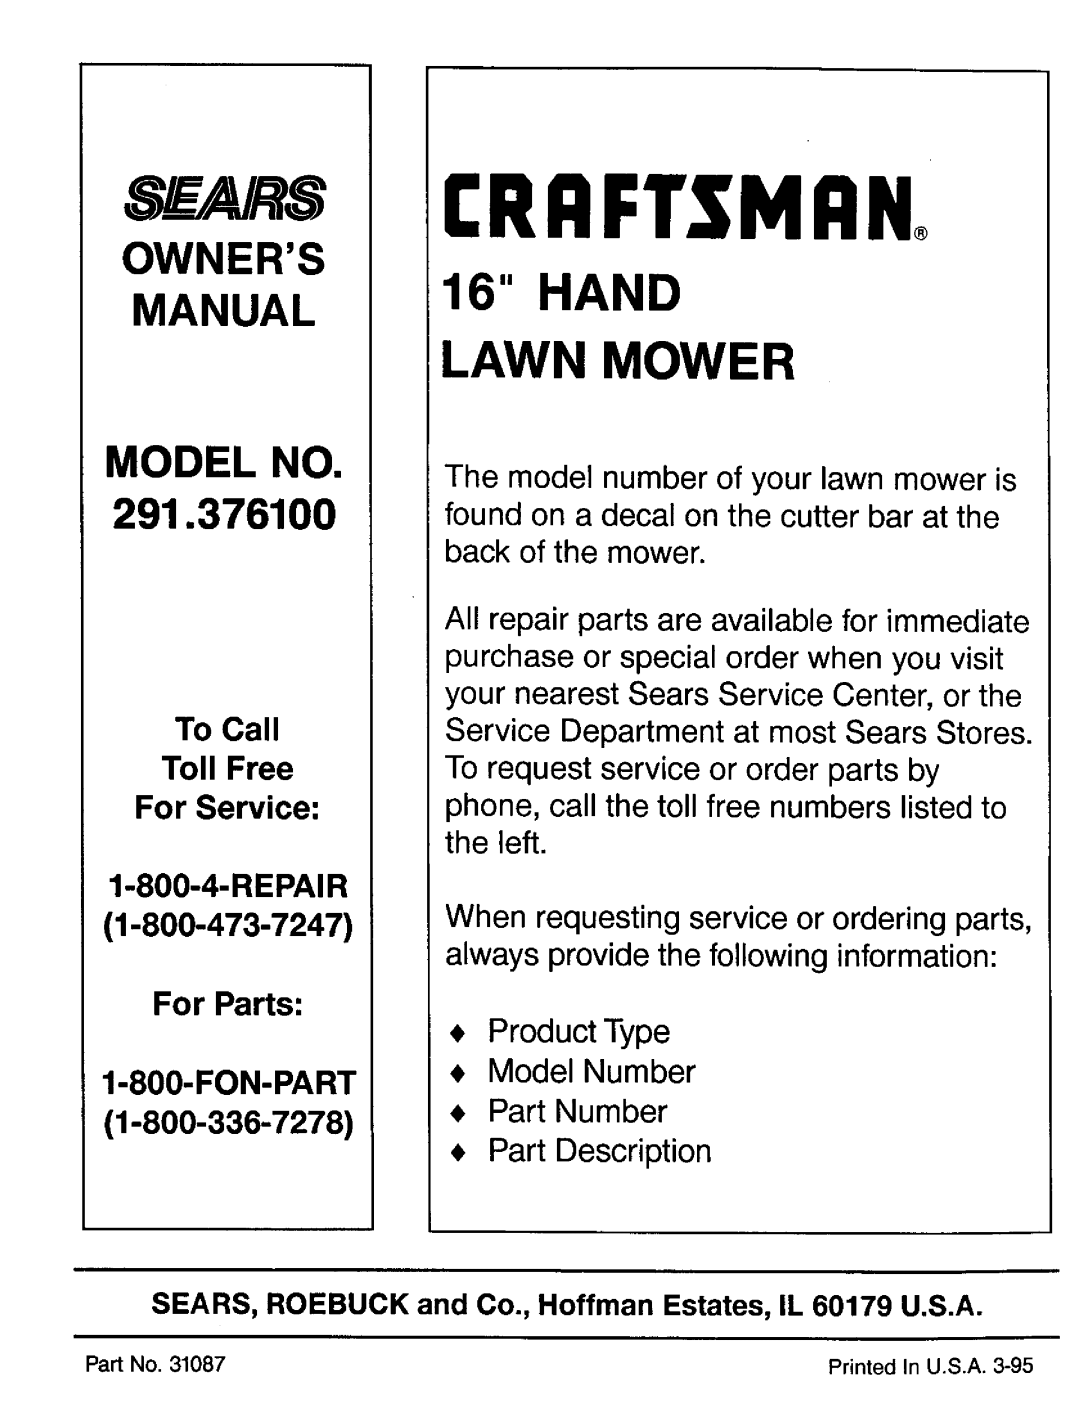 Craftsman 291.376100 CRAFTSMRN,o, Repair, Fon-Part, Ajrs, Hand Lawn Mower, To Call Toll Free For Service, For Parts 